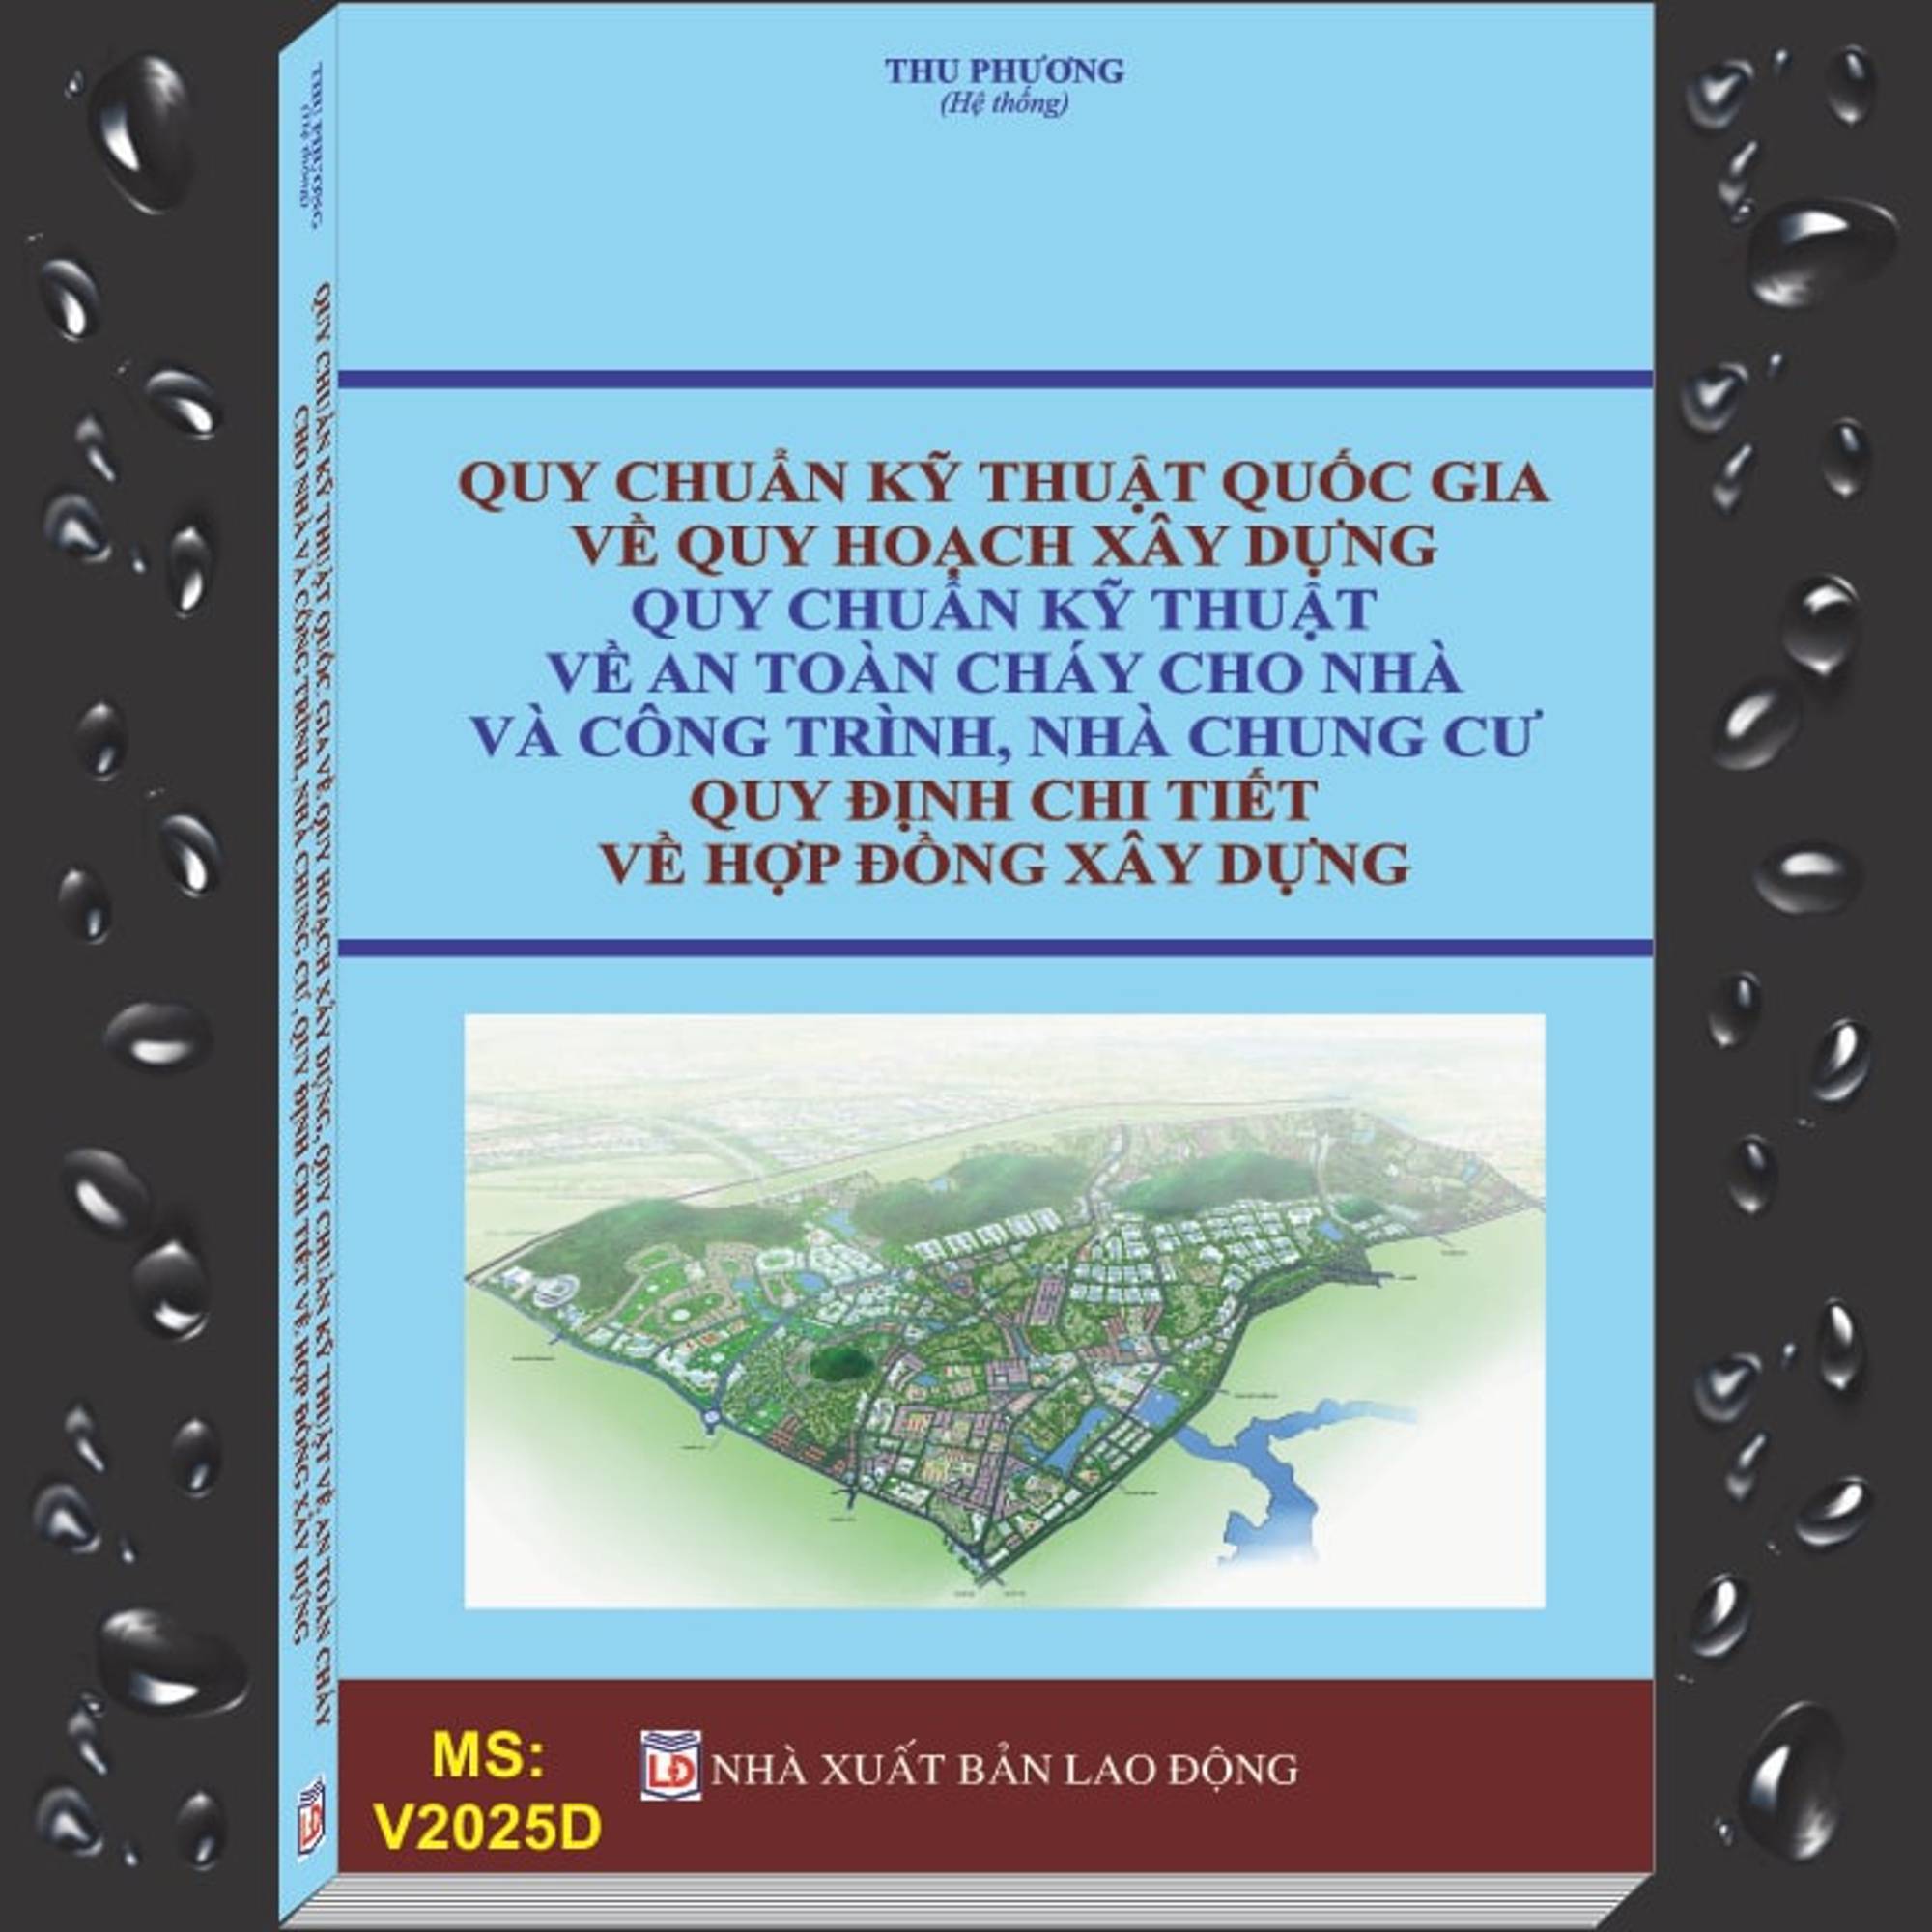 quy chuan ky thuat quoc gia ve quy hoach xay dung, an toan chay